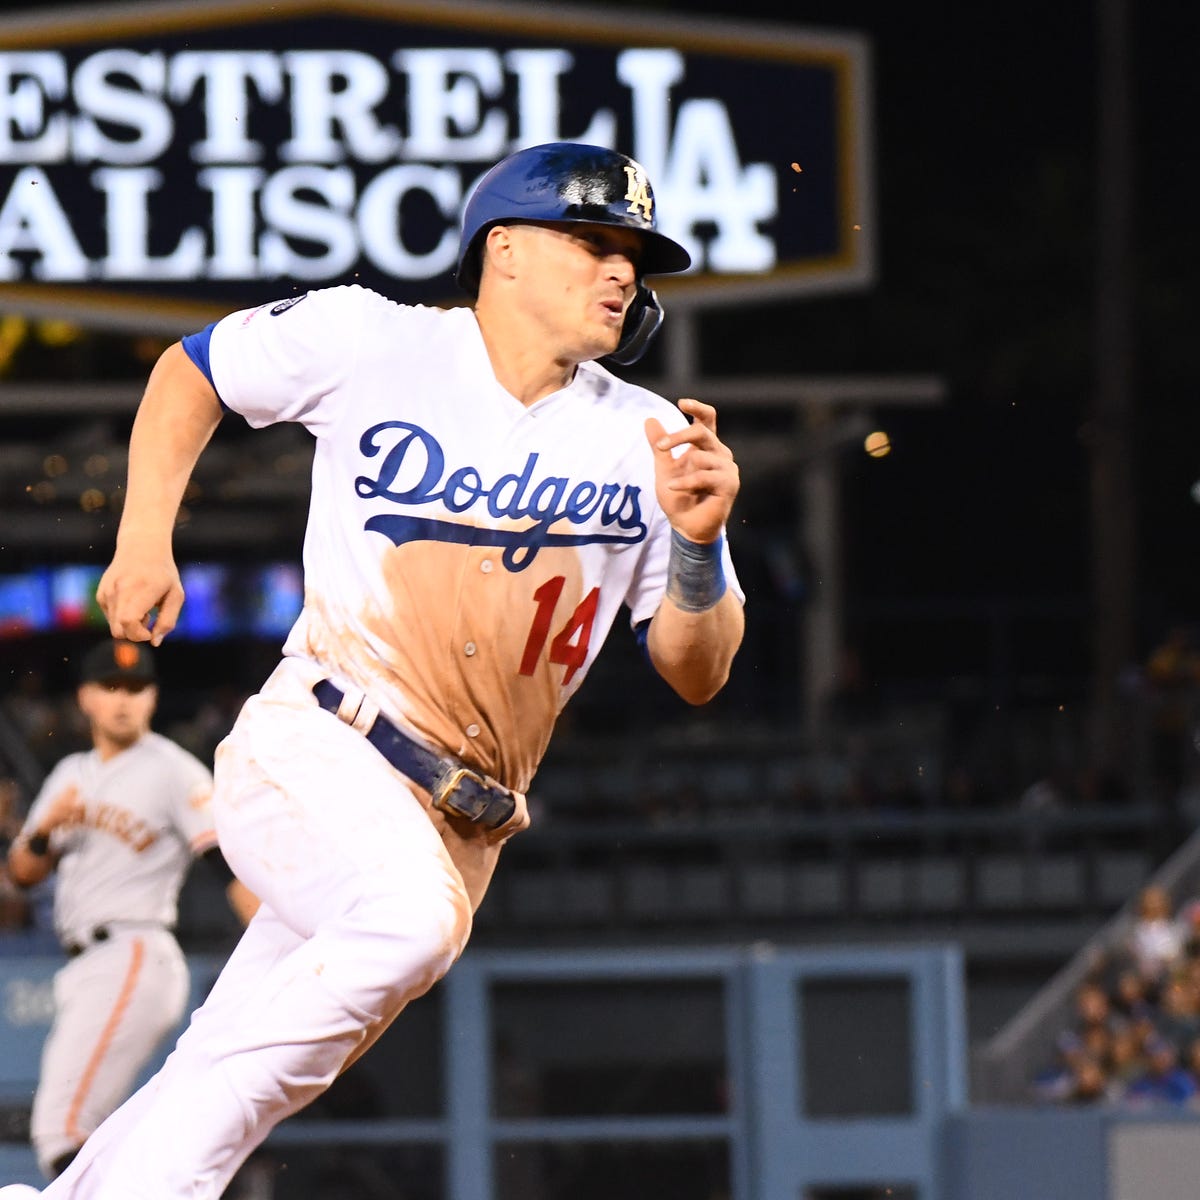 Who's got your number: Dodgers' most favorable matchups, by Cary Osborne